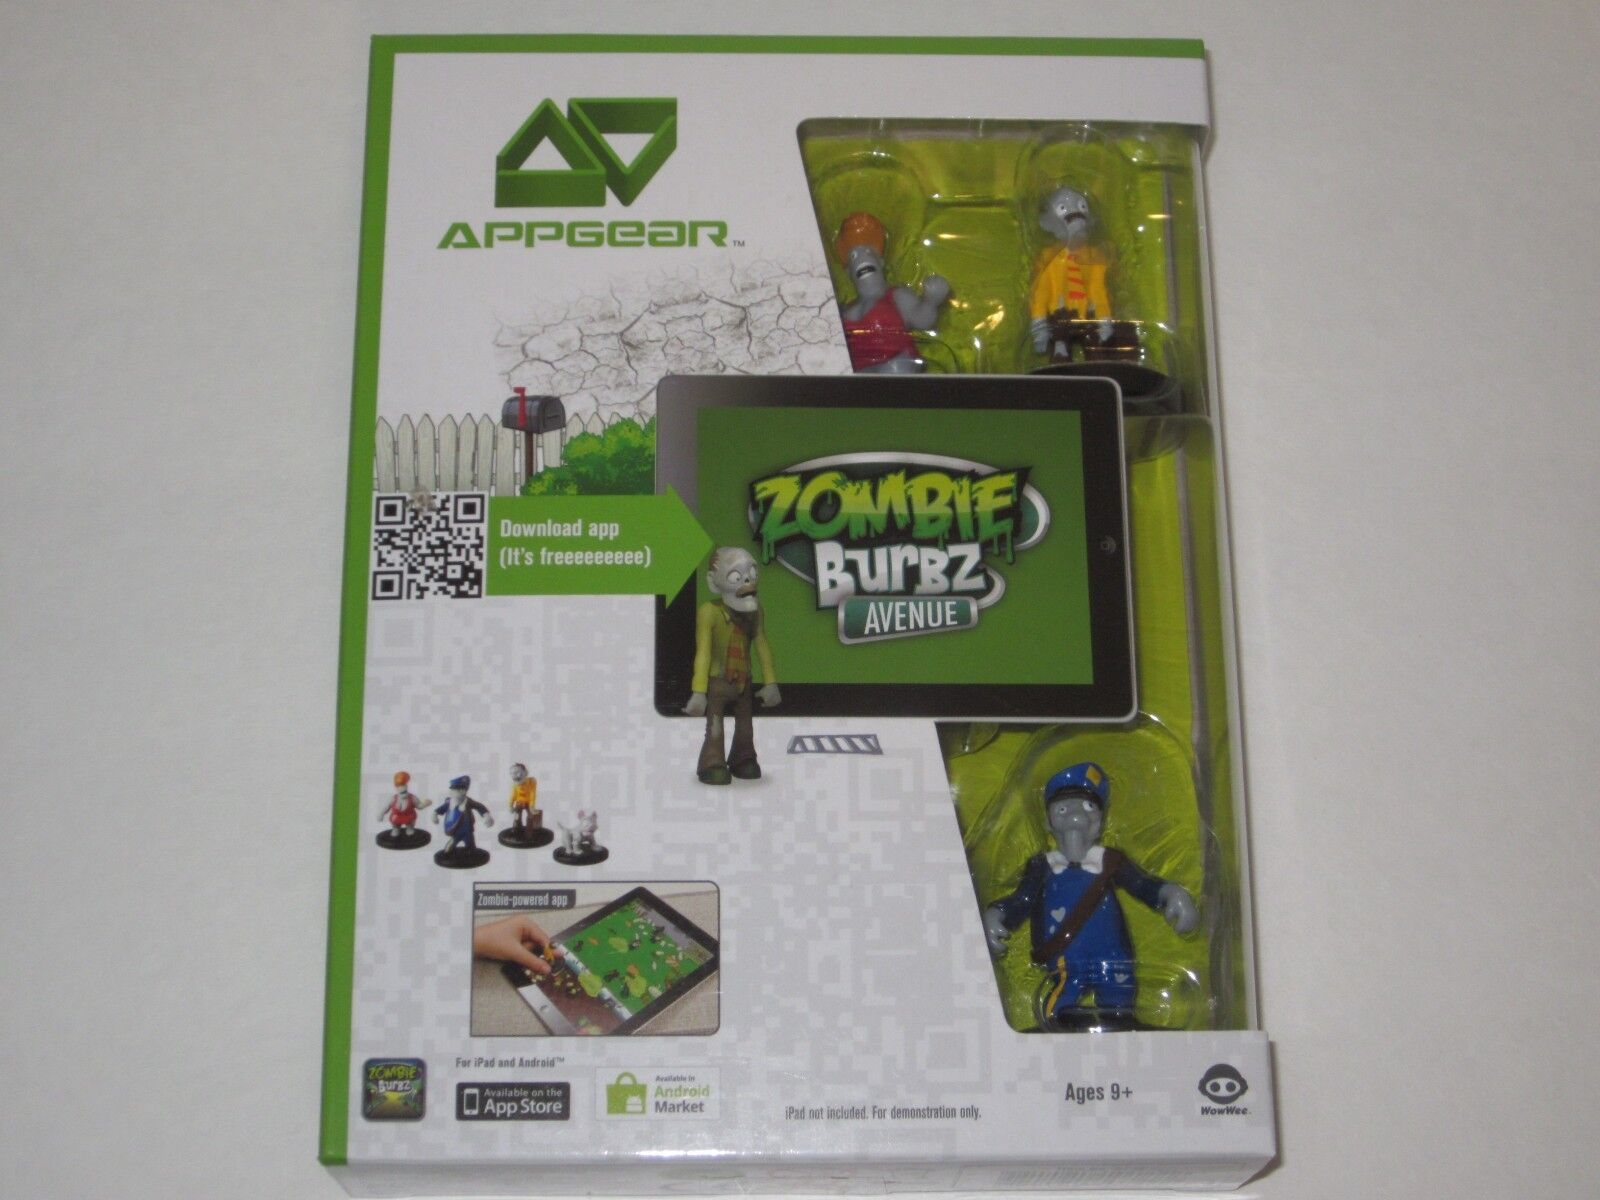 Zombie Burbz APPGEAR - Amplified Reality Game Figures/Mission For iPad & Android